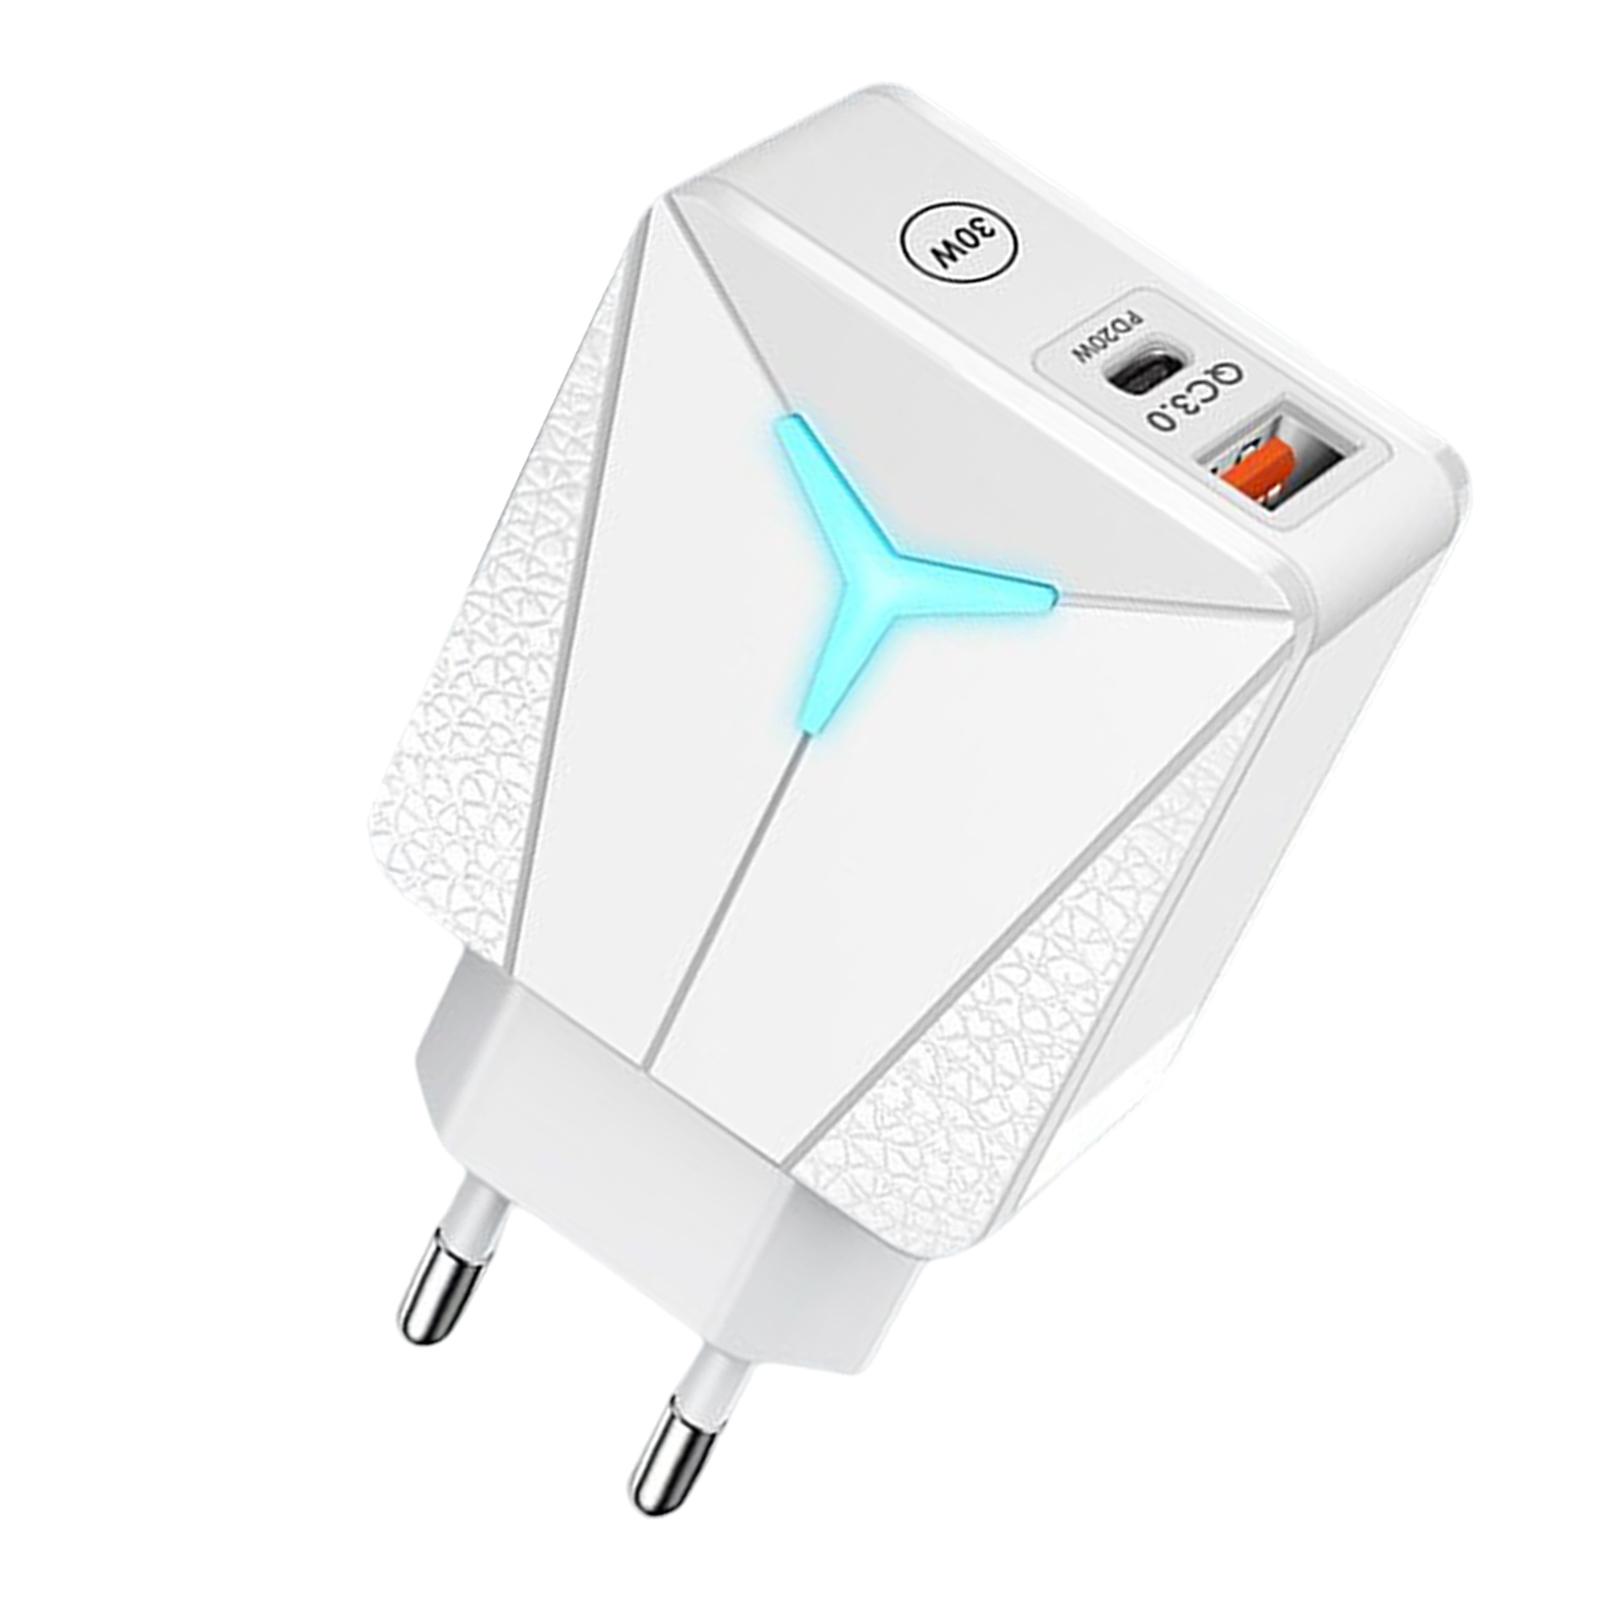 Phone Charger Plug Portable PD 20W QC3.0 Converter for Home Use Travel